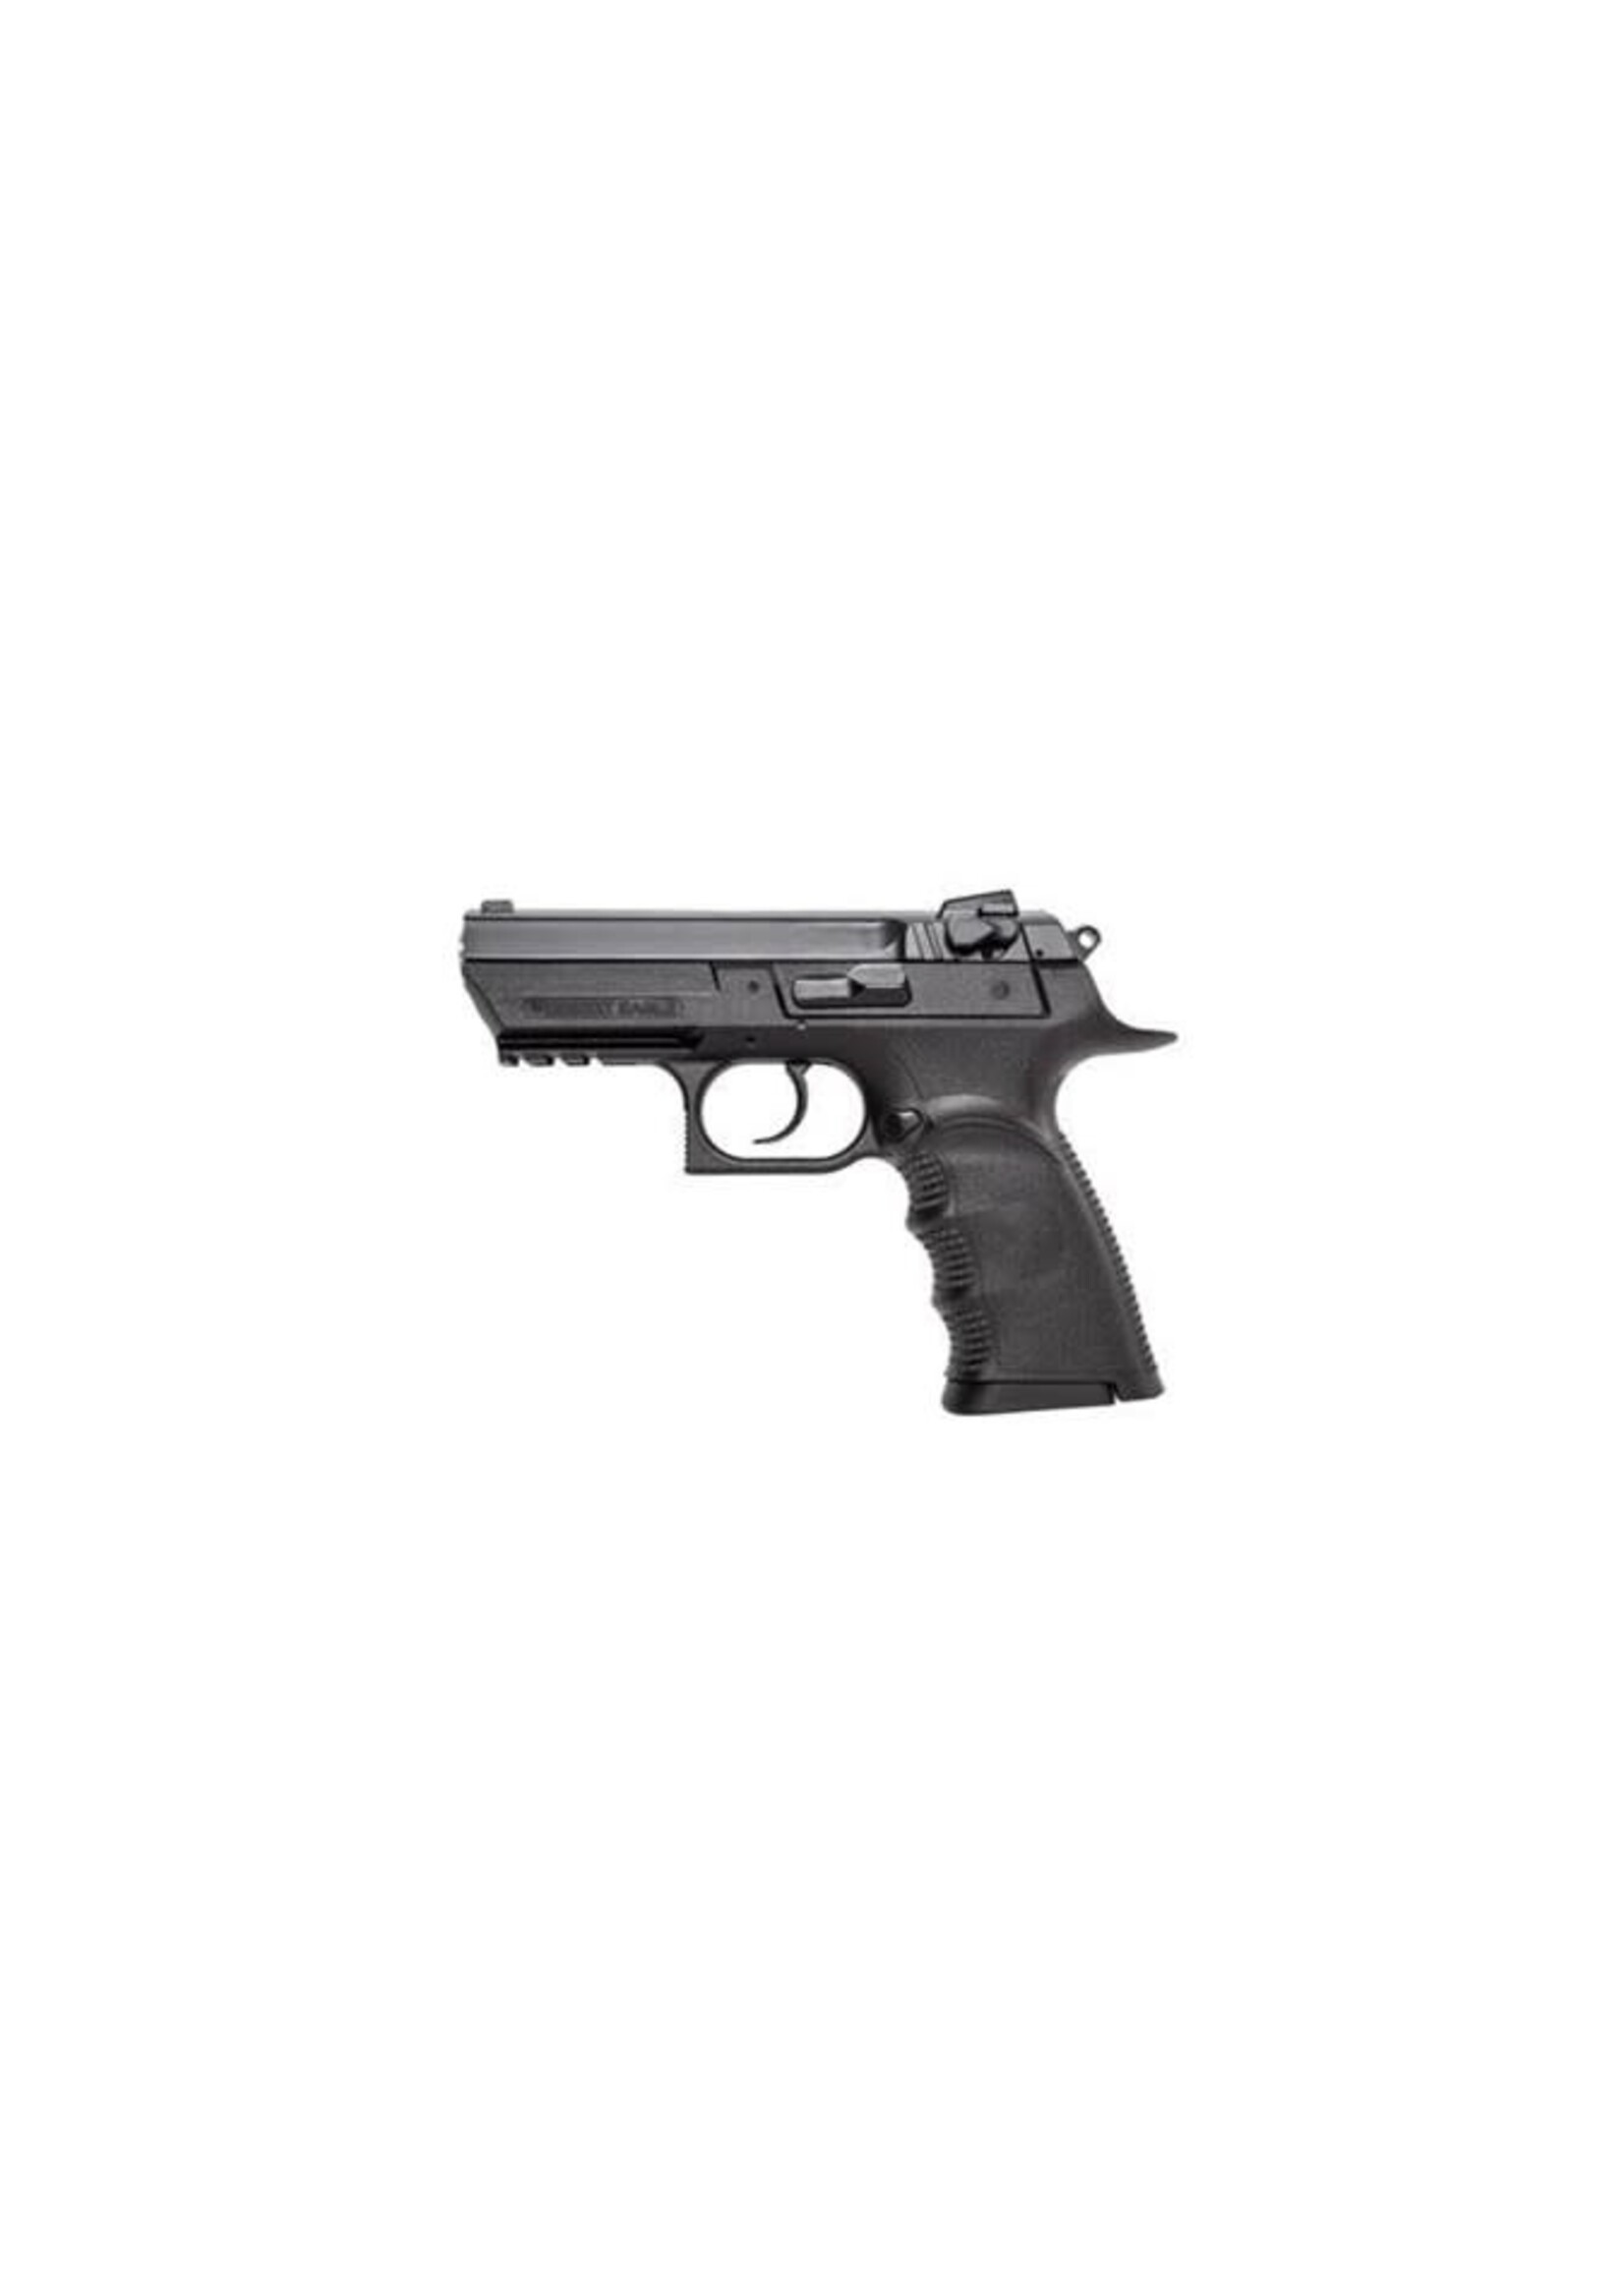 Magnum Research Magnum Research BE99153RSL Baby Eagle III Semi-Compact 9mm Luger Caliber with 3.85" Barrel, 15+1 Capacity, Black Finish Picatinny Rail/Beavertail Frame, Matte Black Oxide Carbon Steel Slide & Finger Grooved Polymer Grip